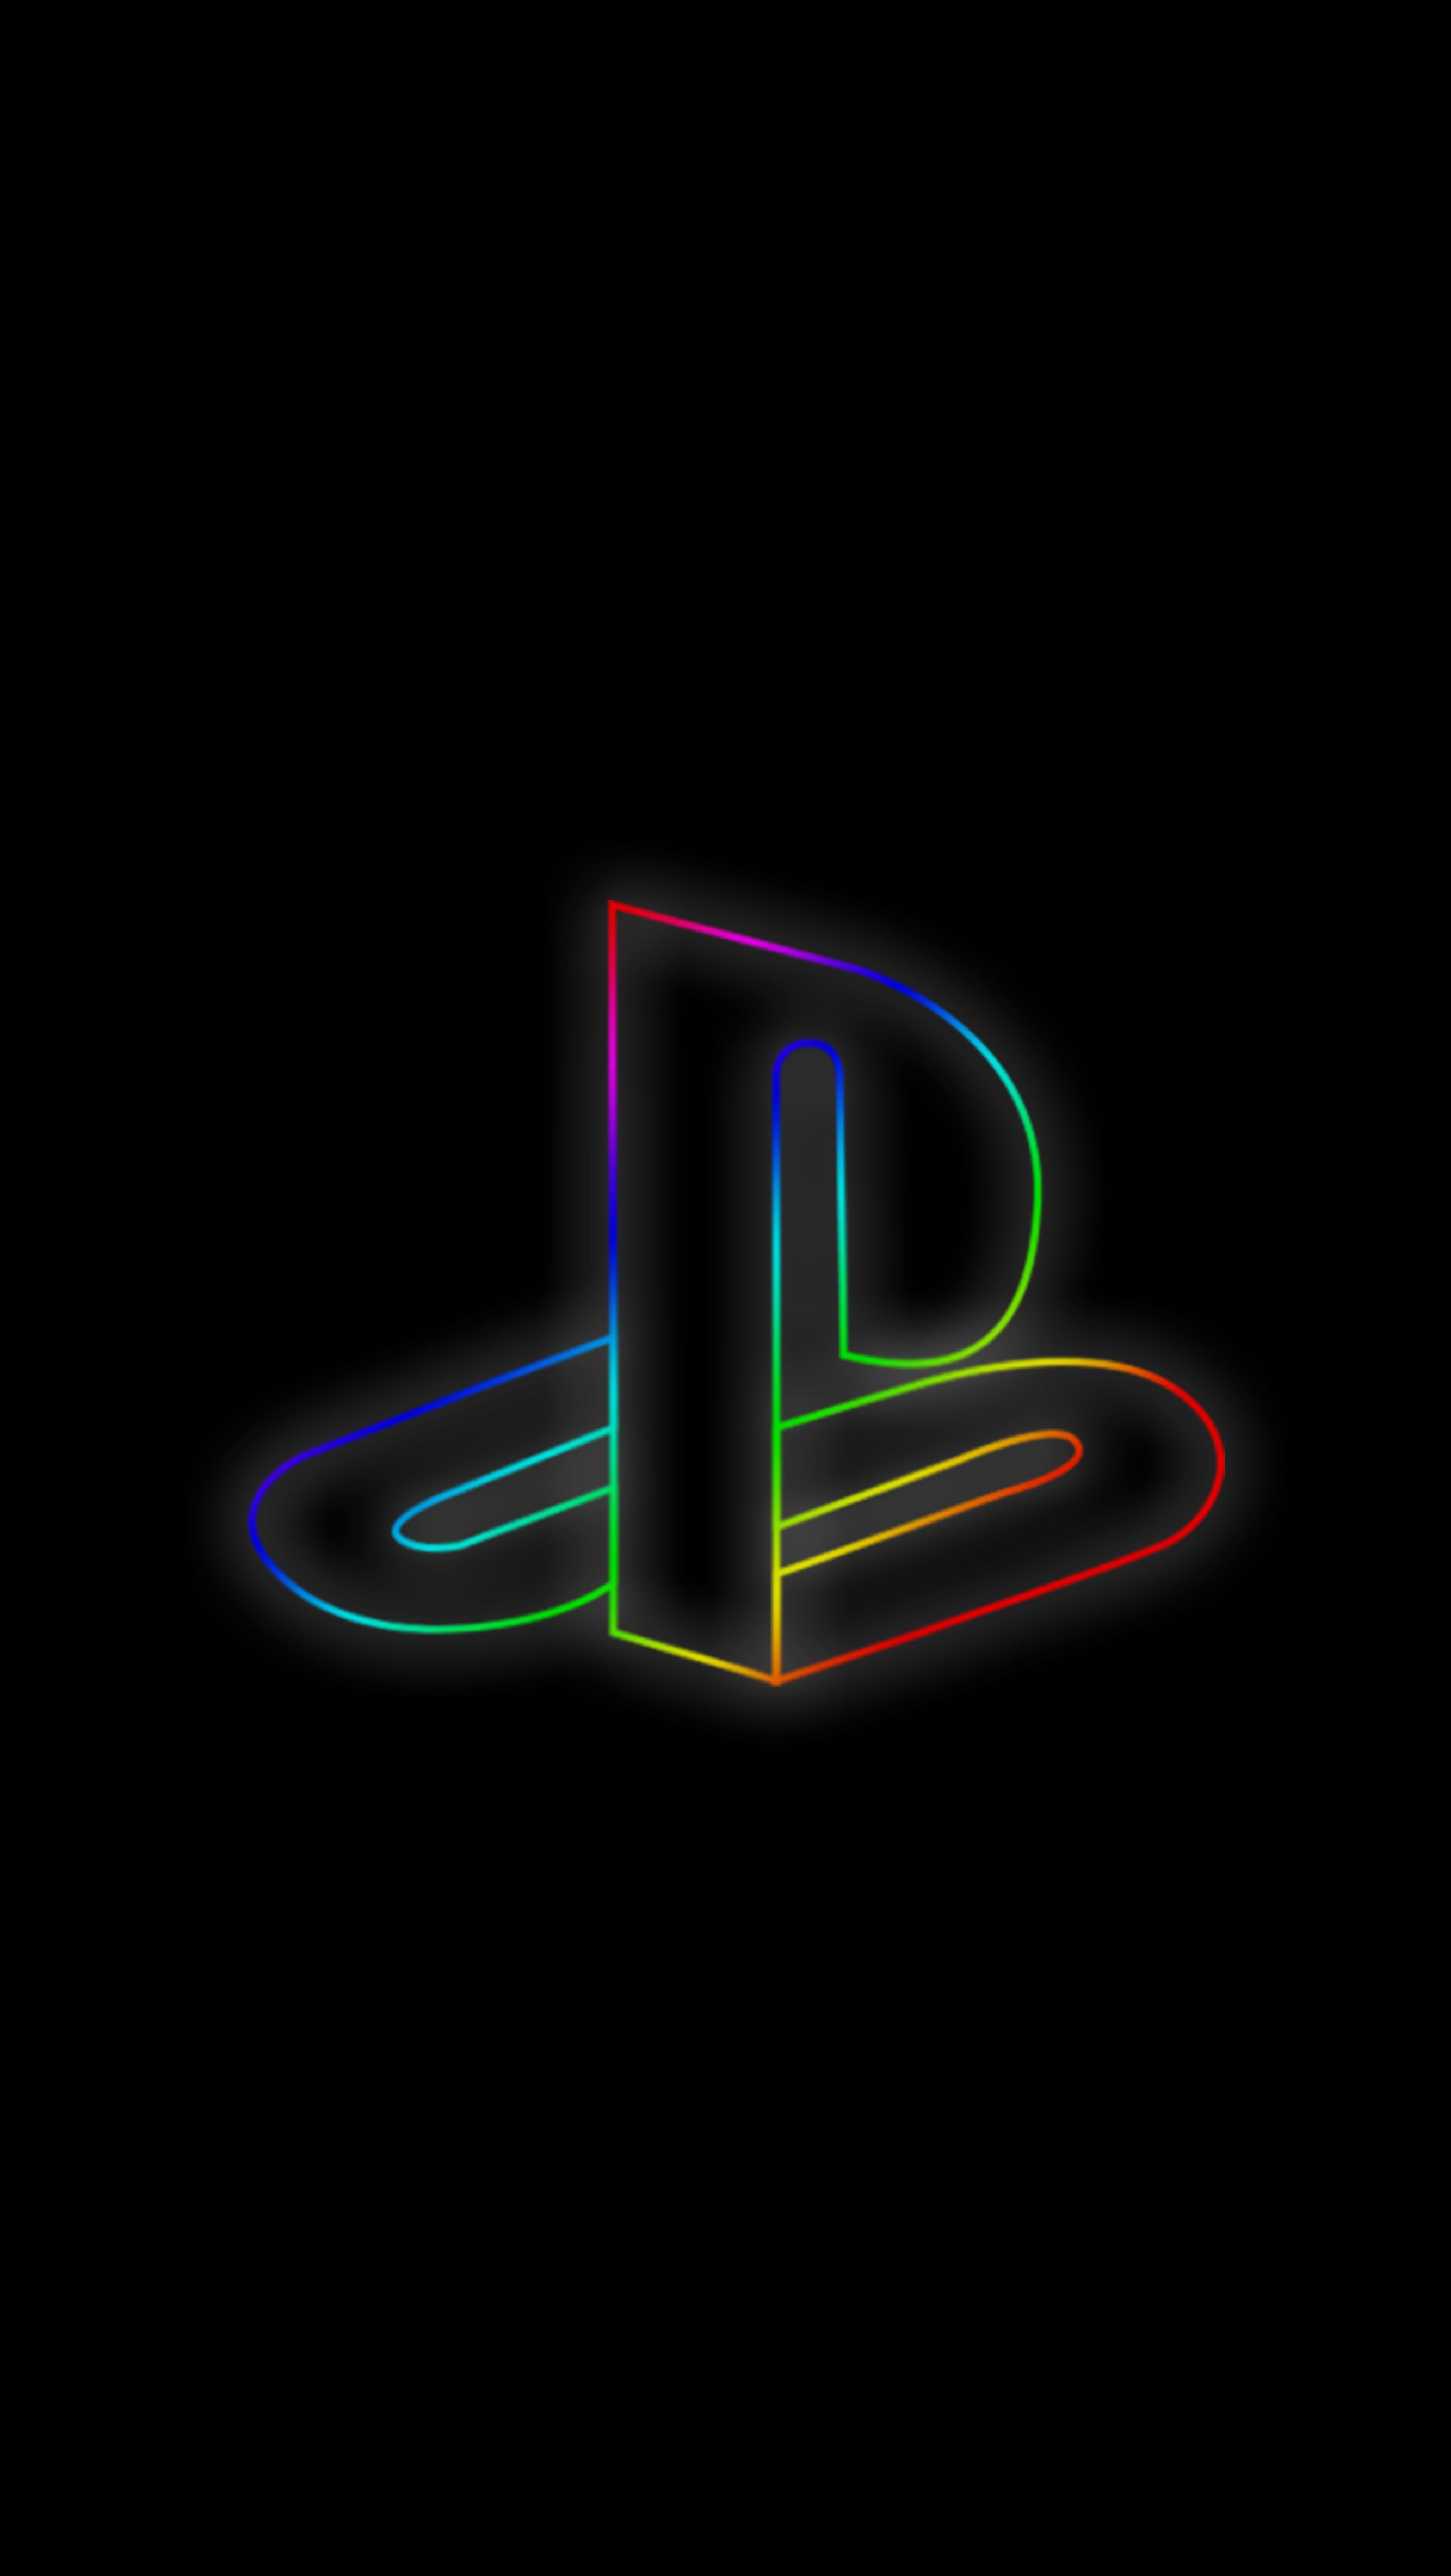 Neon Playstation Background. Best gaming wallpaper, Retro games wallpaper, Playstation